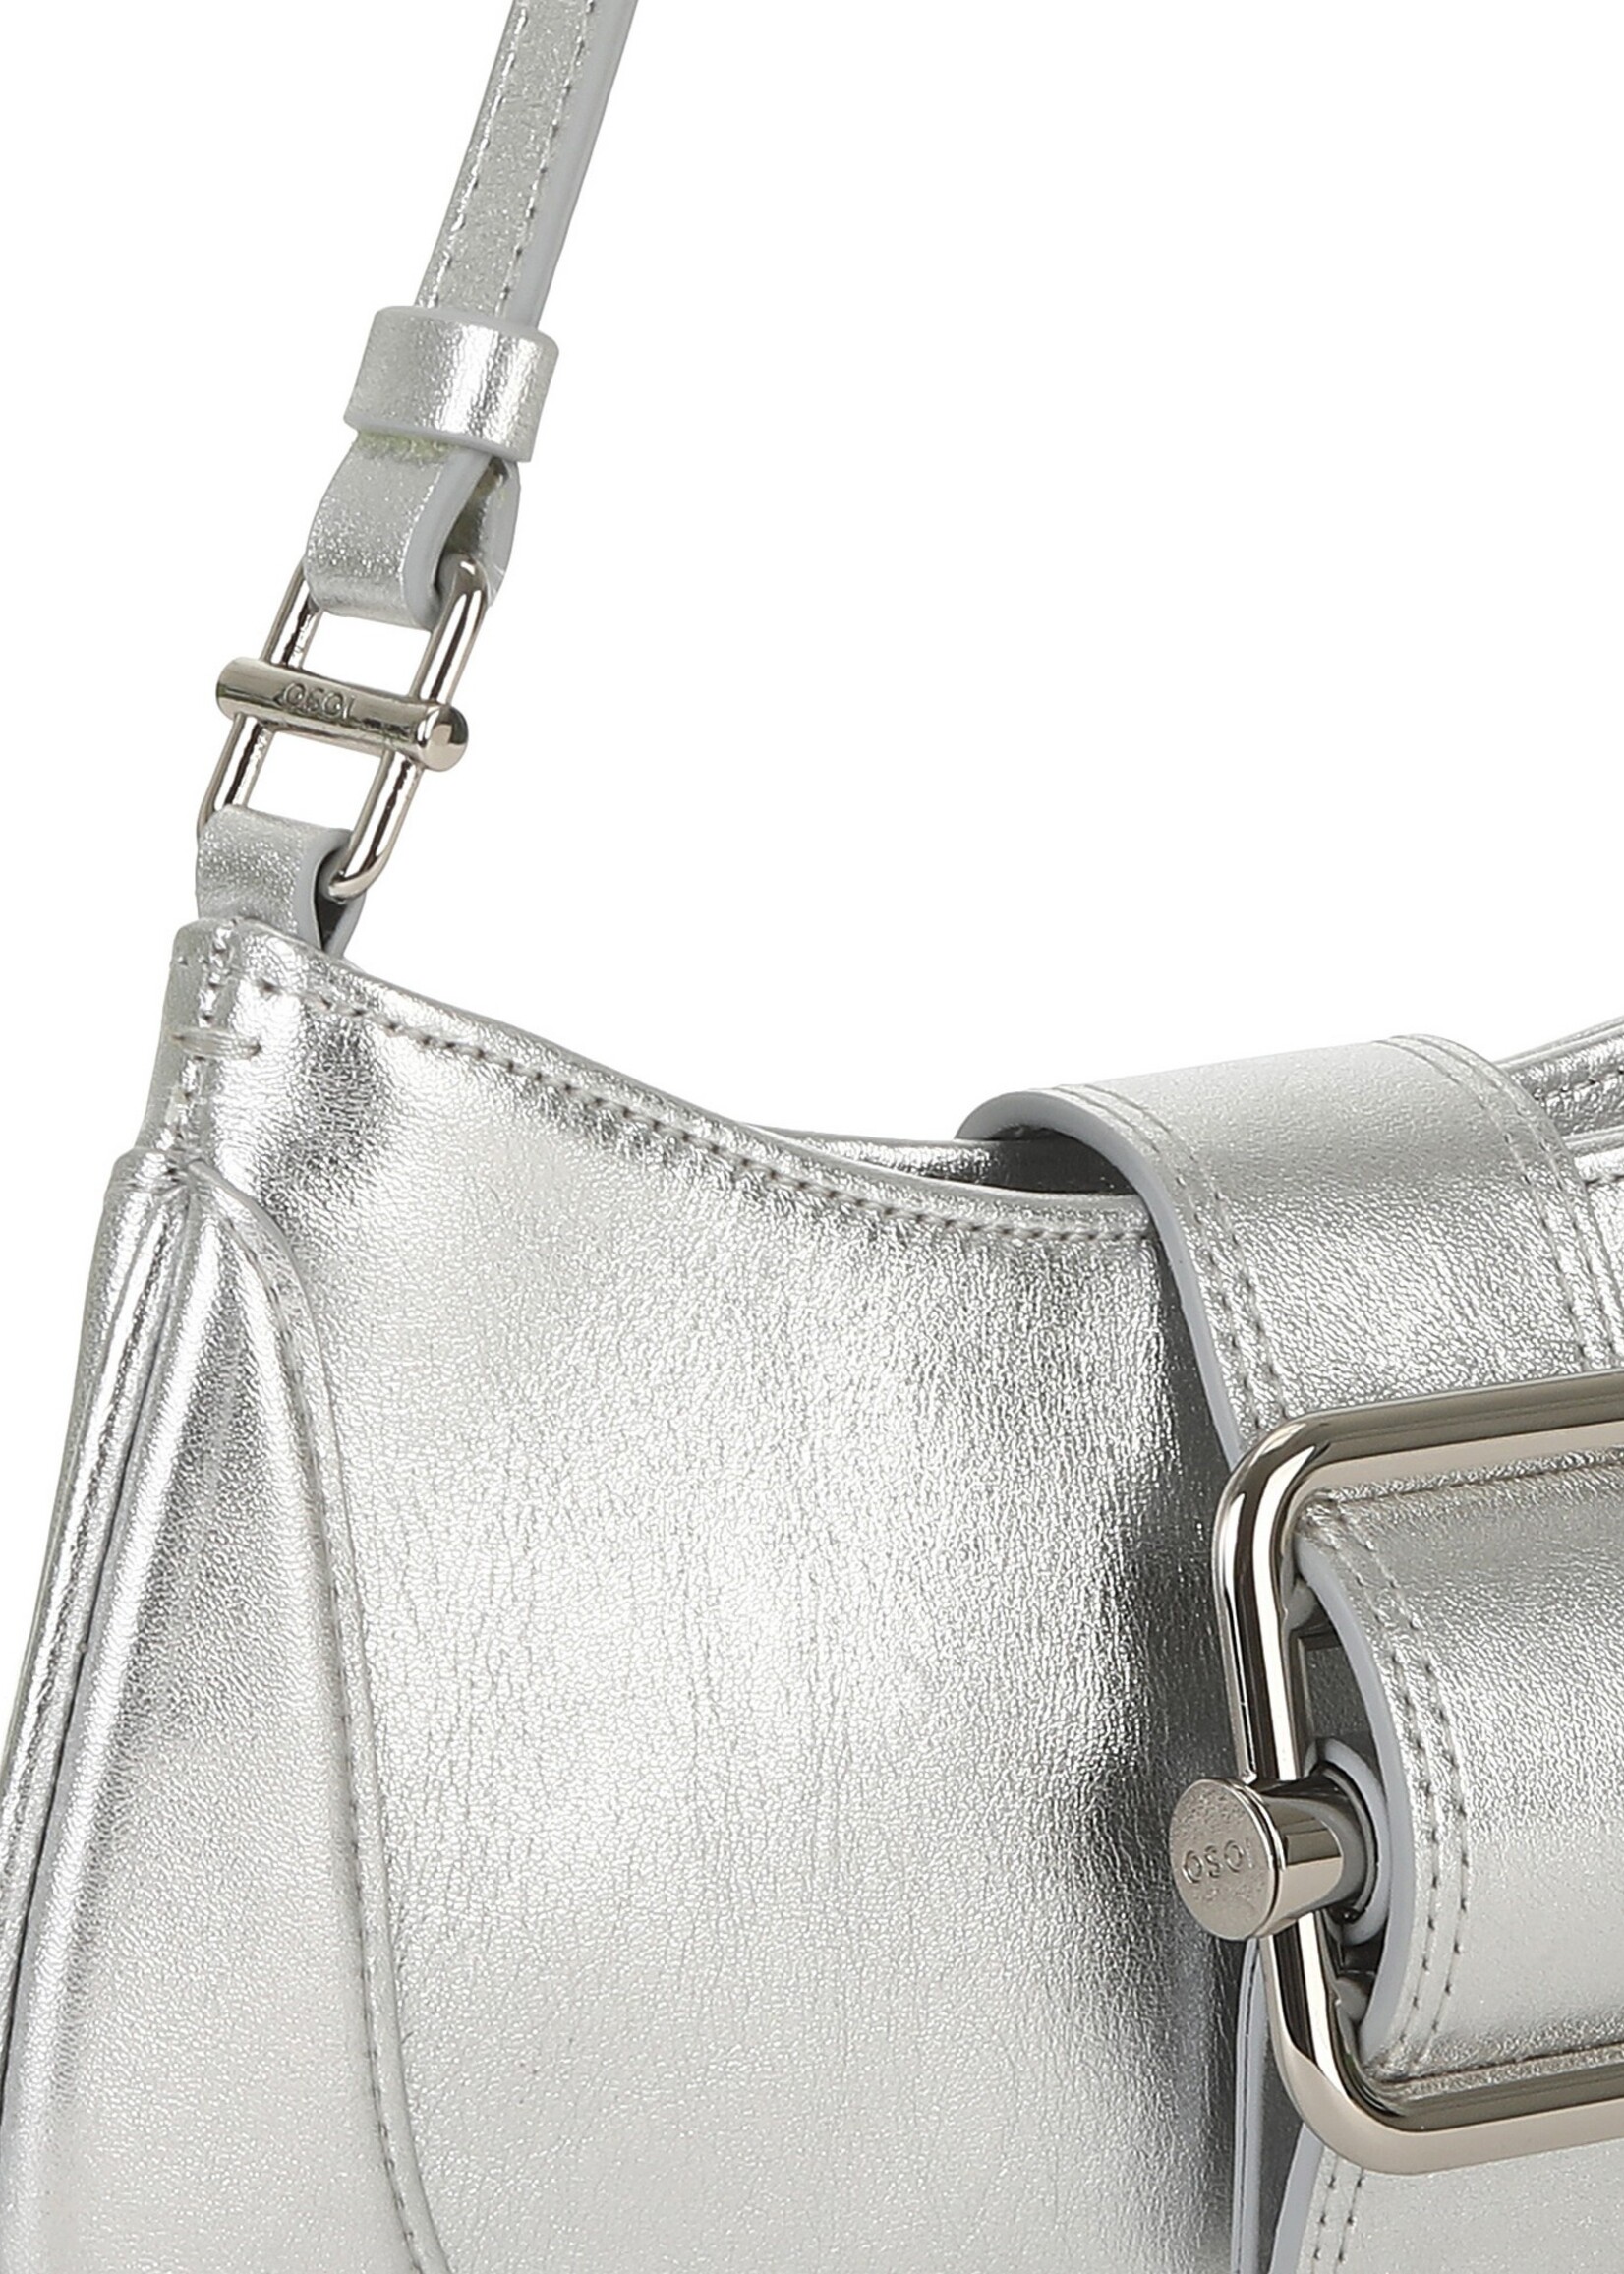 OSOI Small Shoulder Brocle Bag in Silver Leather